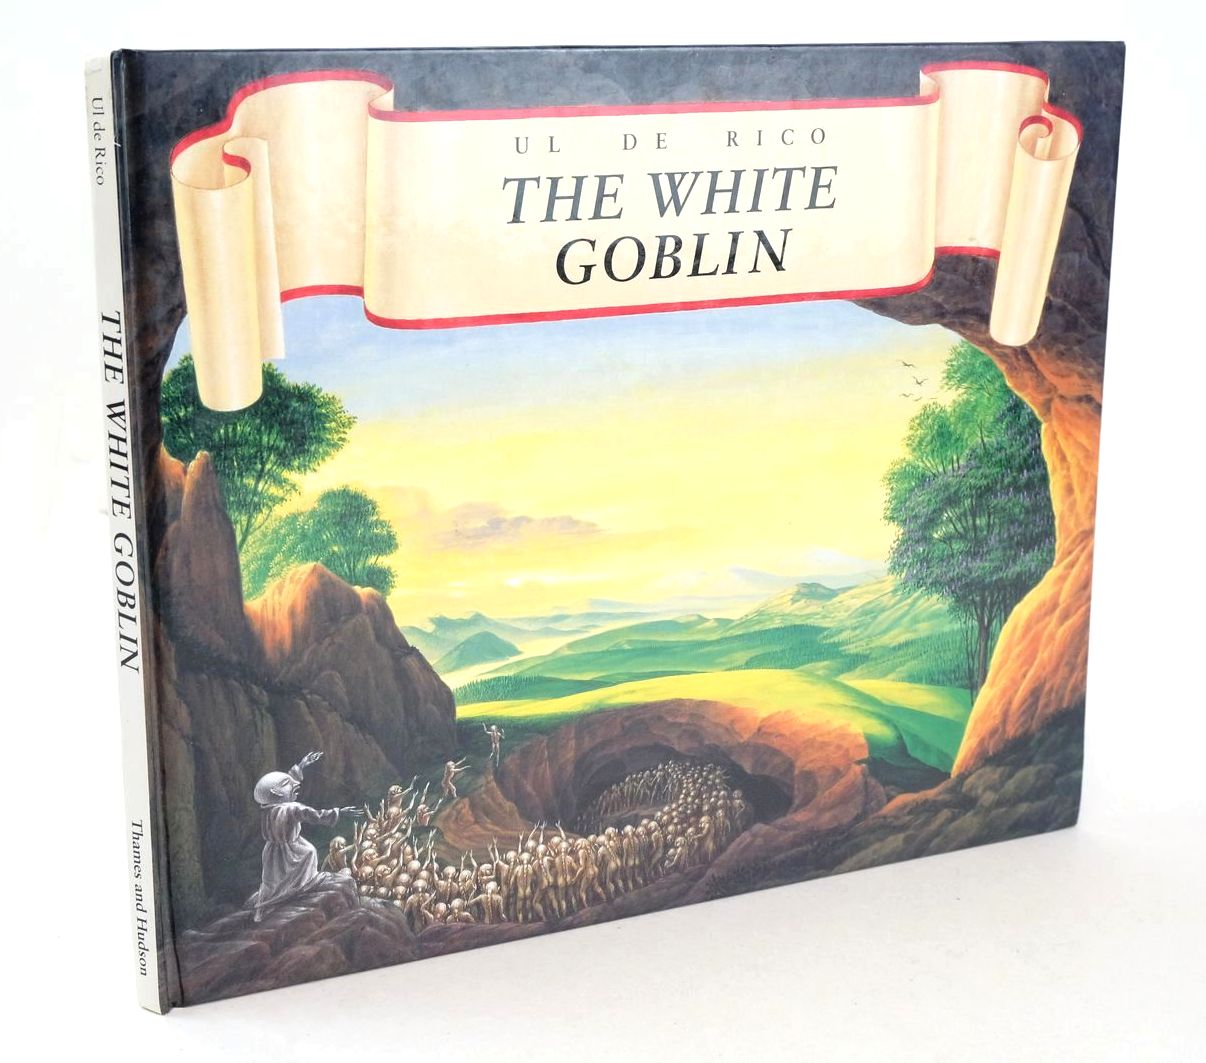 Photo of THE WHITE GOBLIN written by De Rico, Ul illustrated by De Rico, Ul published by Thames and Hudson (STOCK CODE: 1326100)  for sale by Stella & Rose's Books